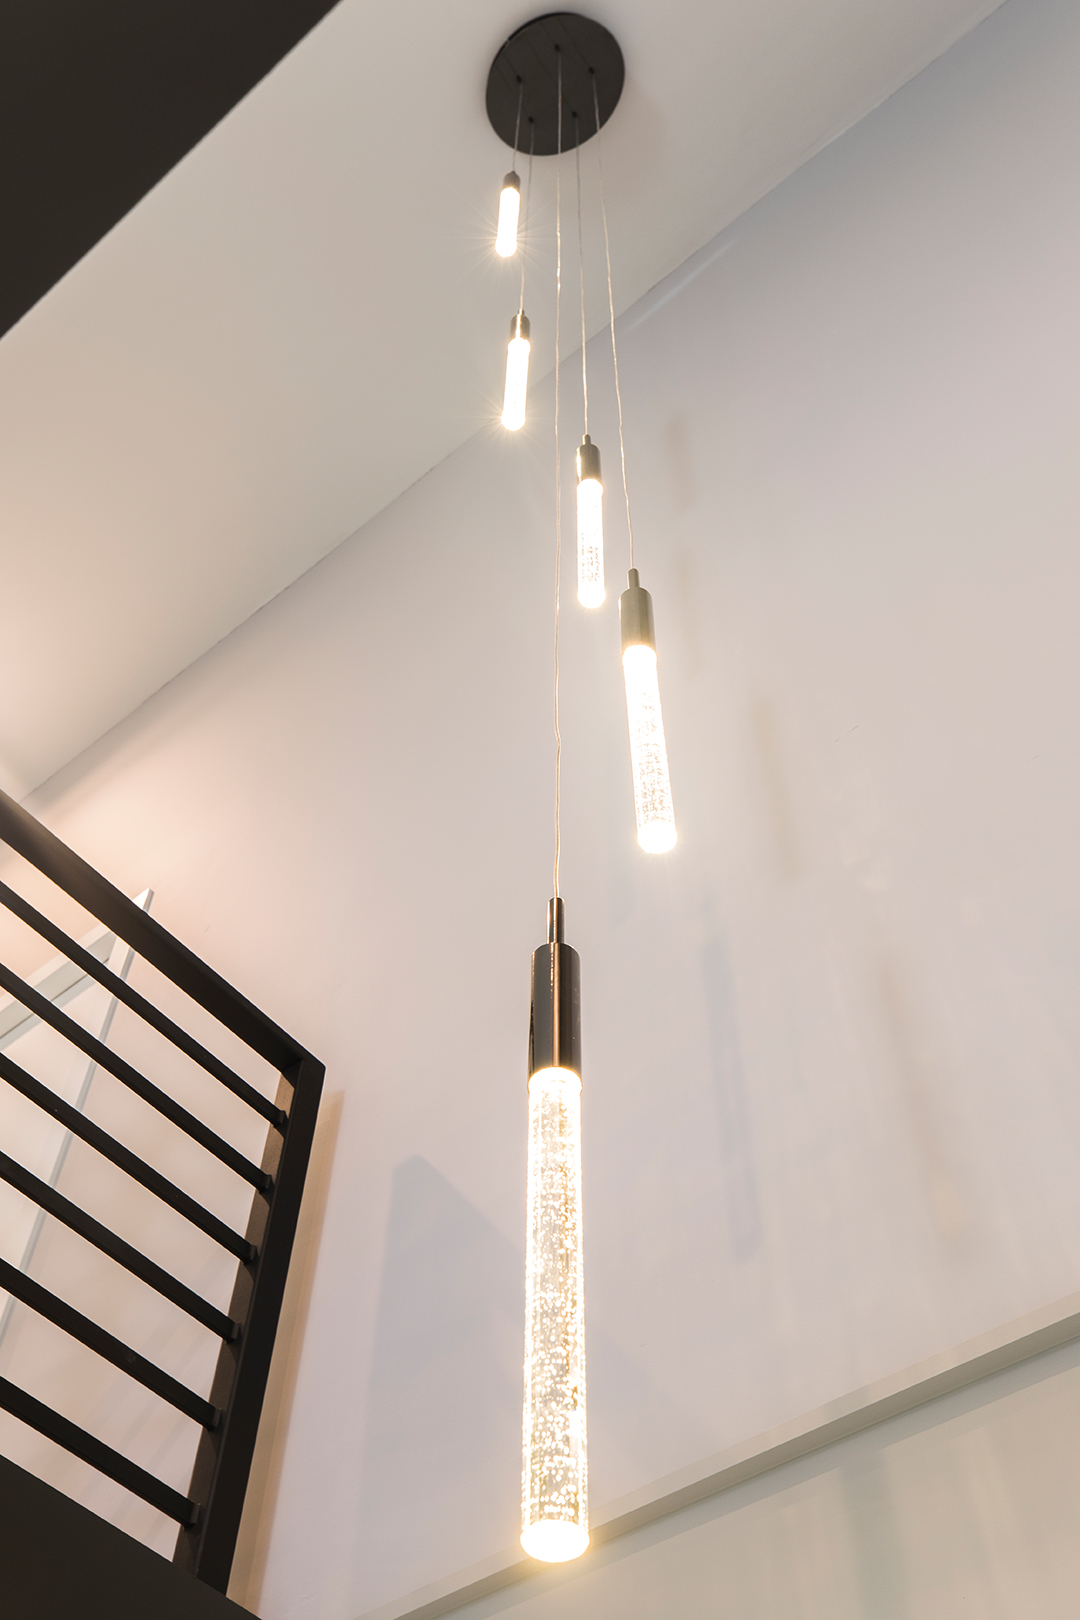 A decorative light fixture adds style while illuminating both levels.